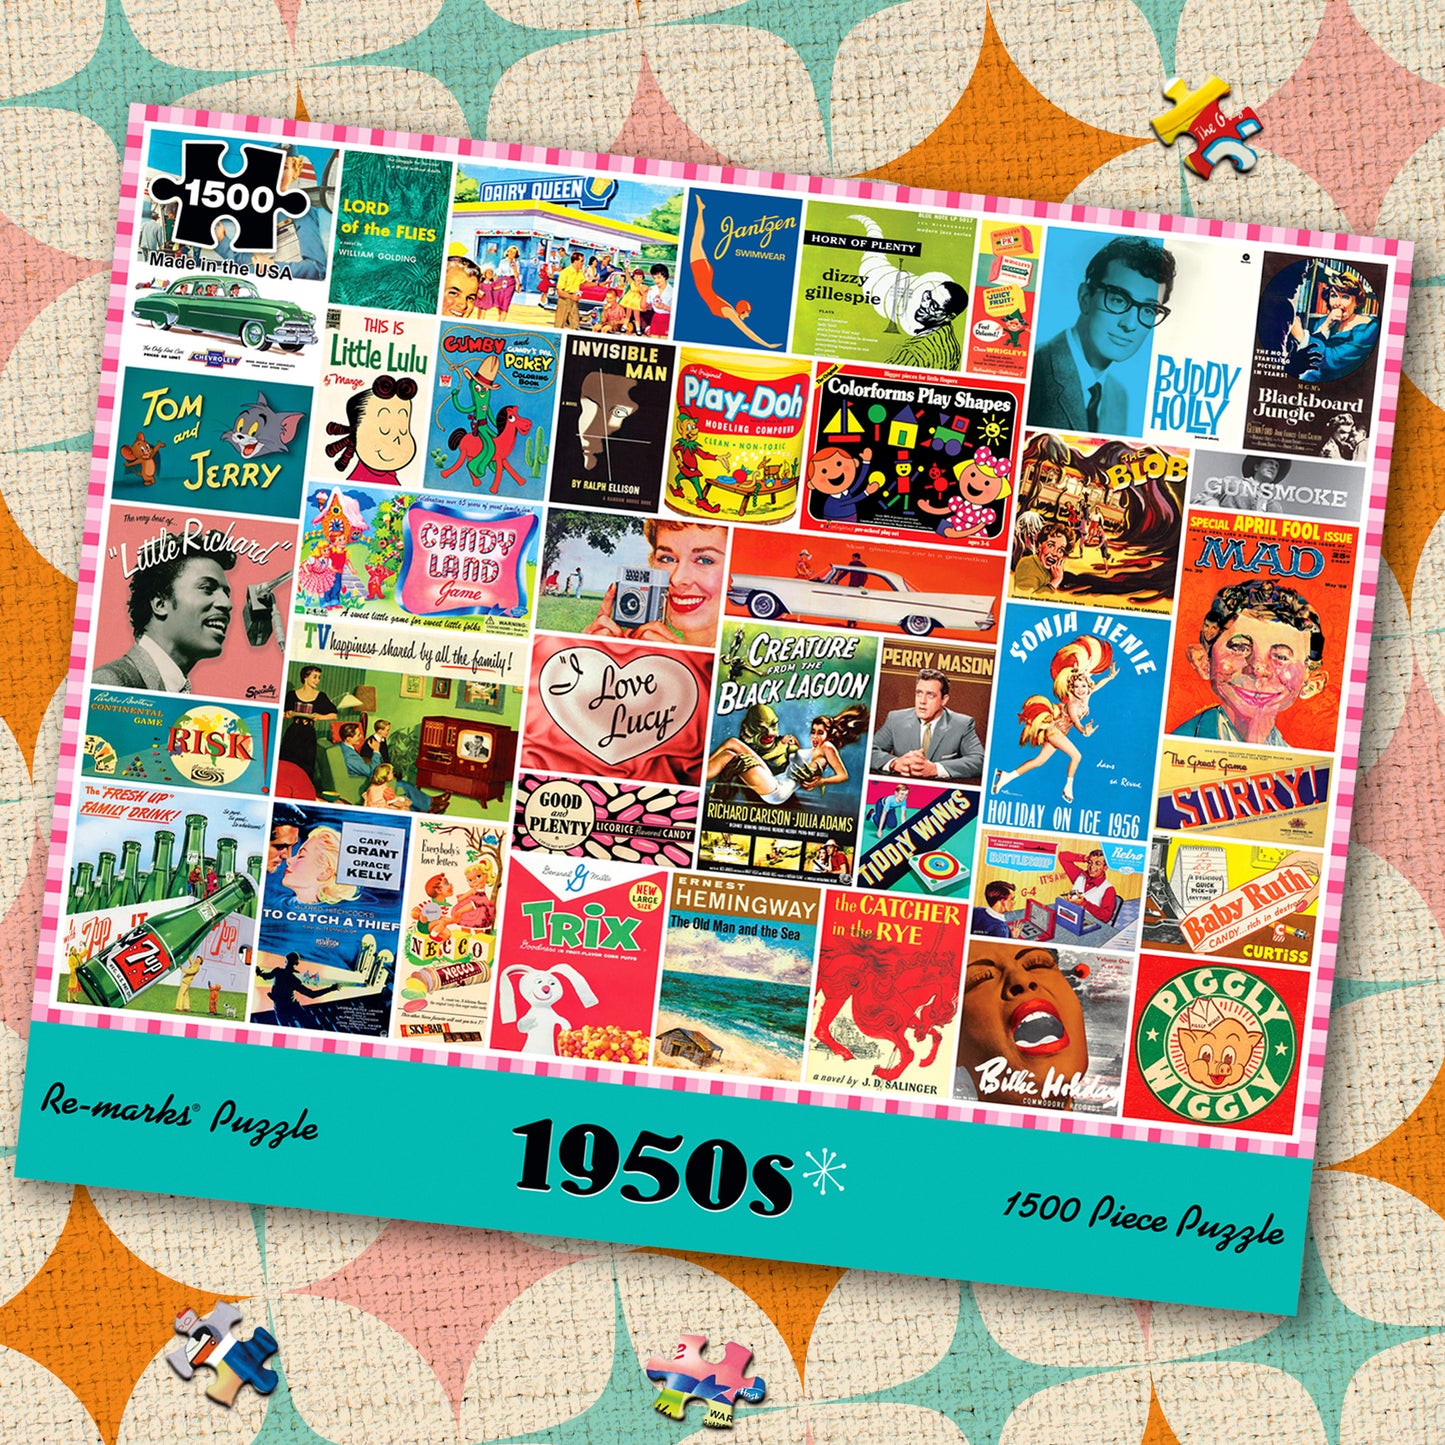 1950s Collage 1500-Piece Jigsaw Puzzle